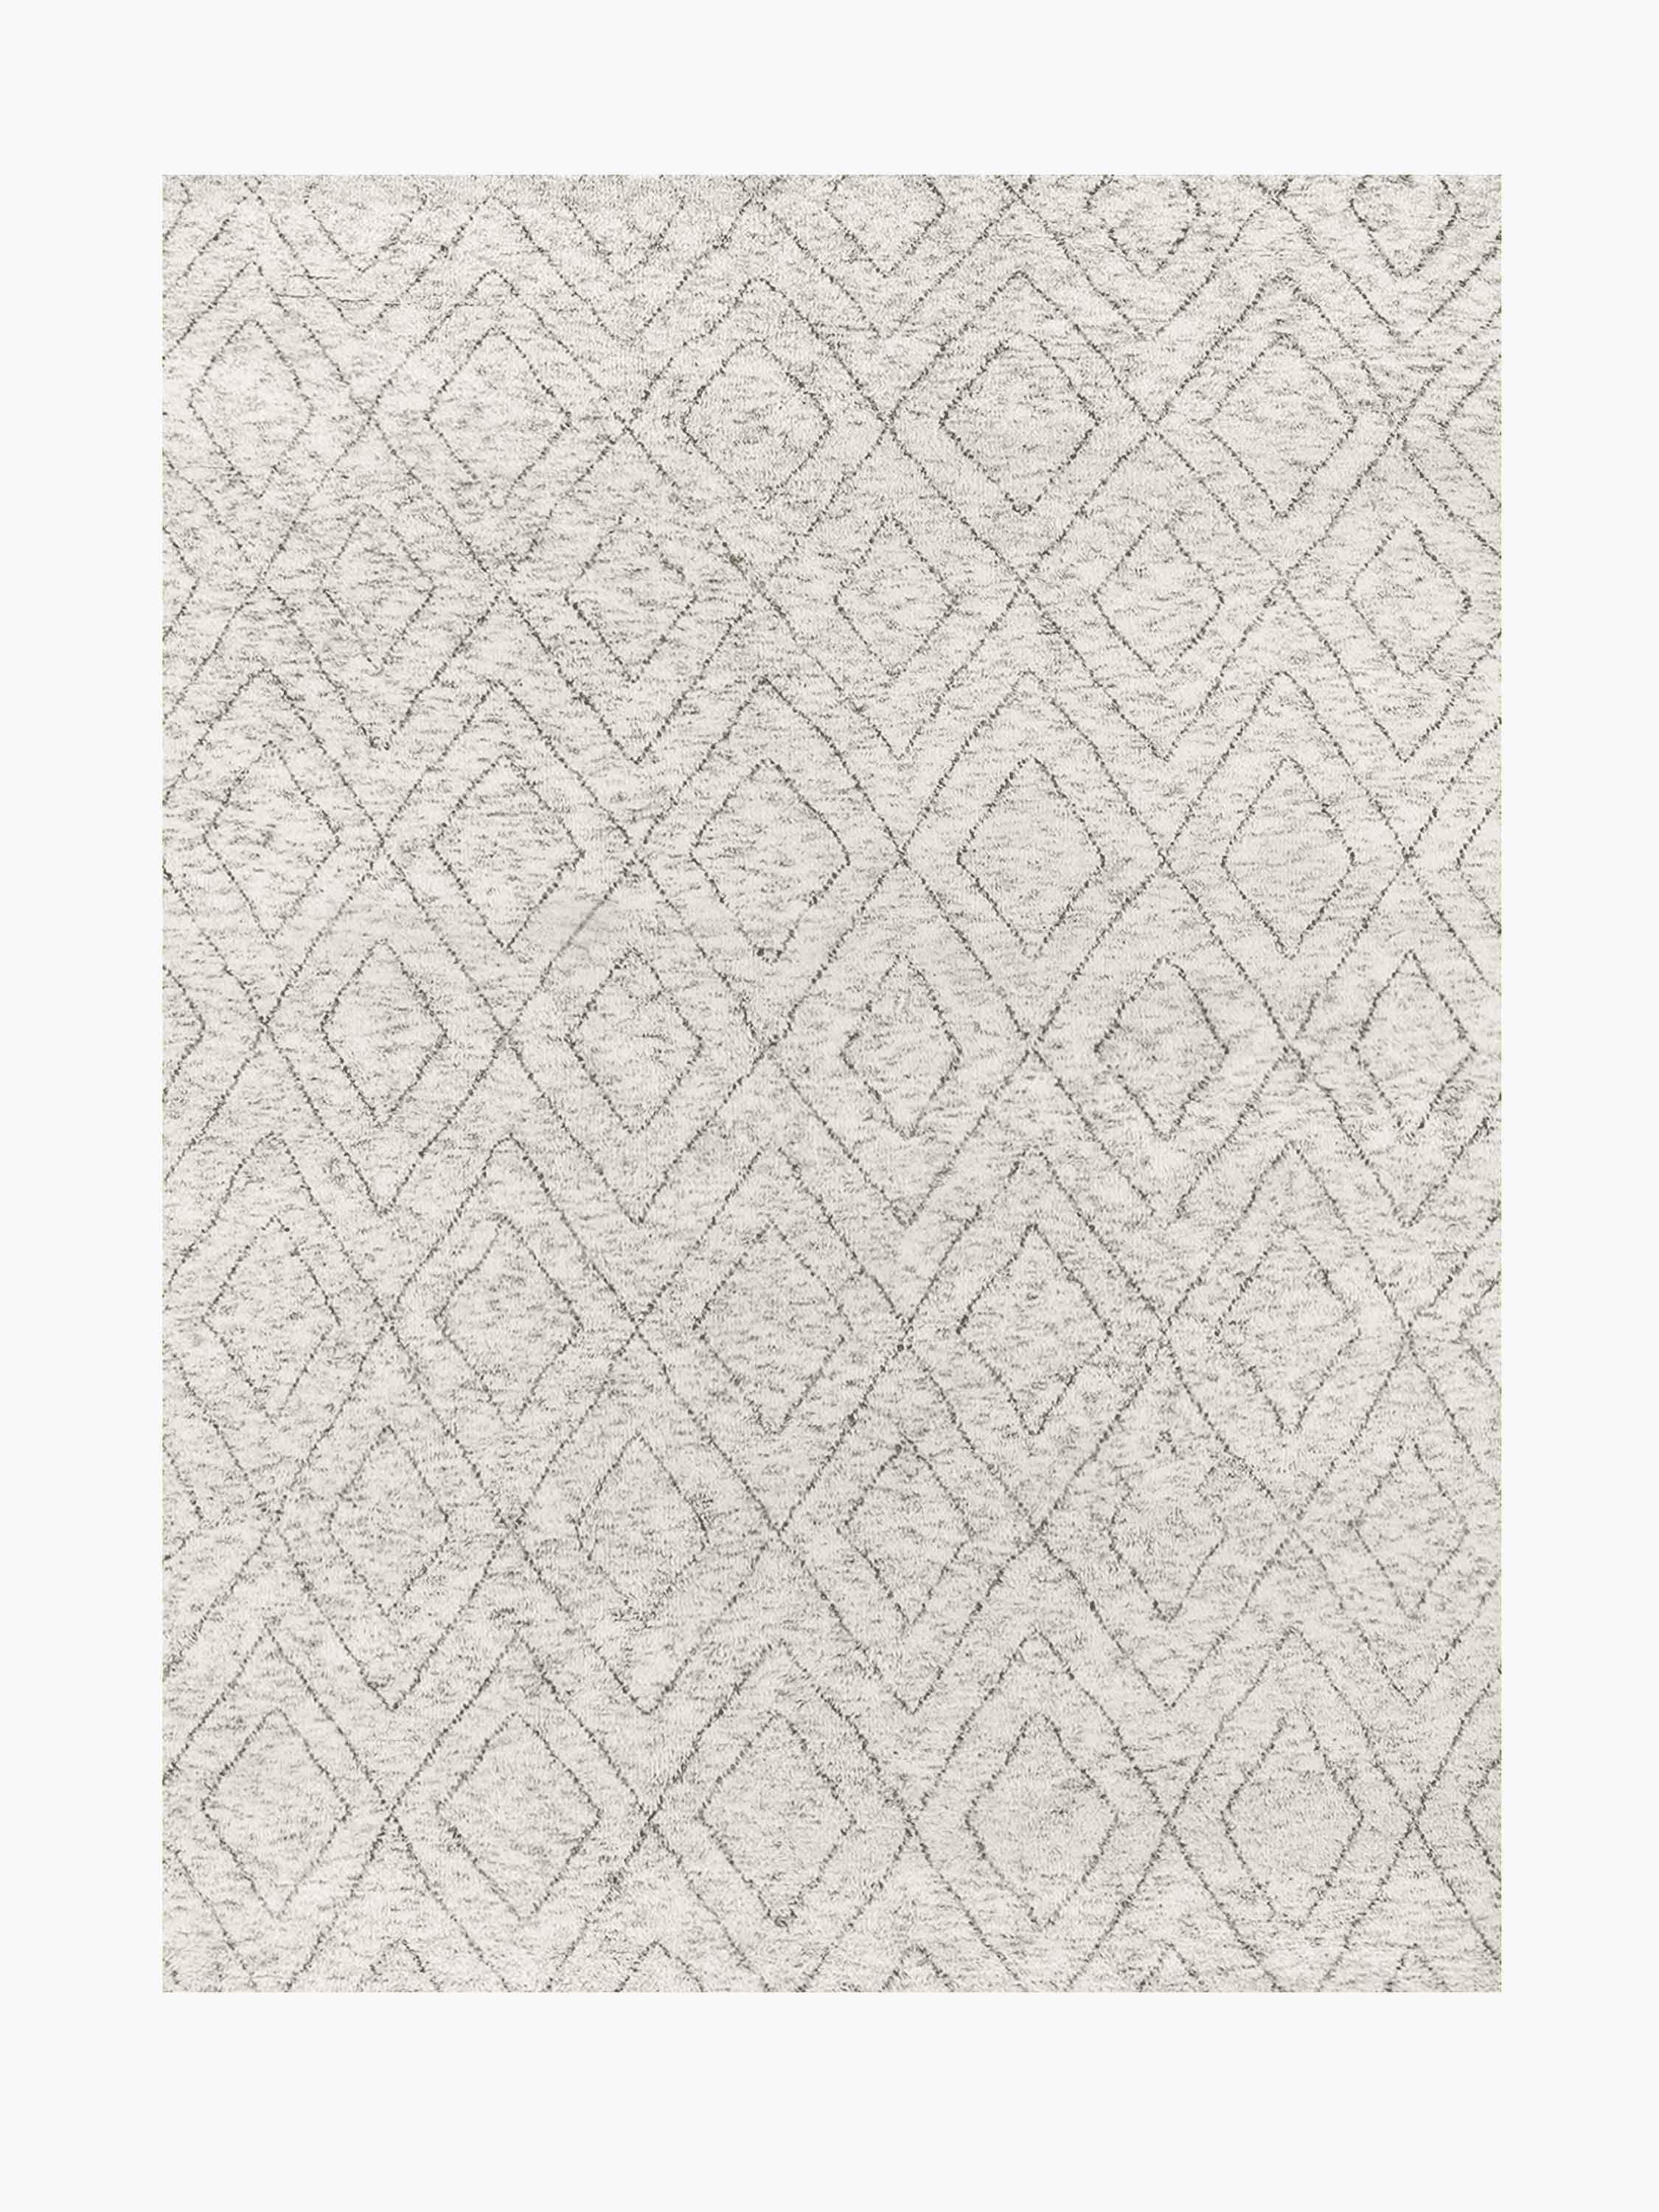 For Sale: Silver Ben Soleimani Double Diamond Rug– Moroccan Hand-knotted Wool Grey 8'x10'